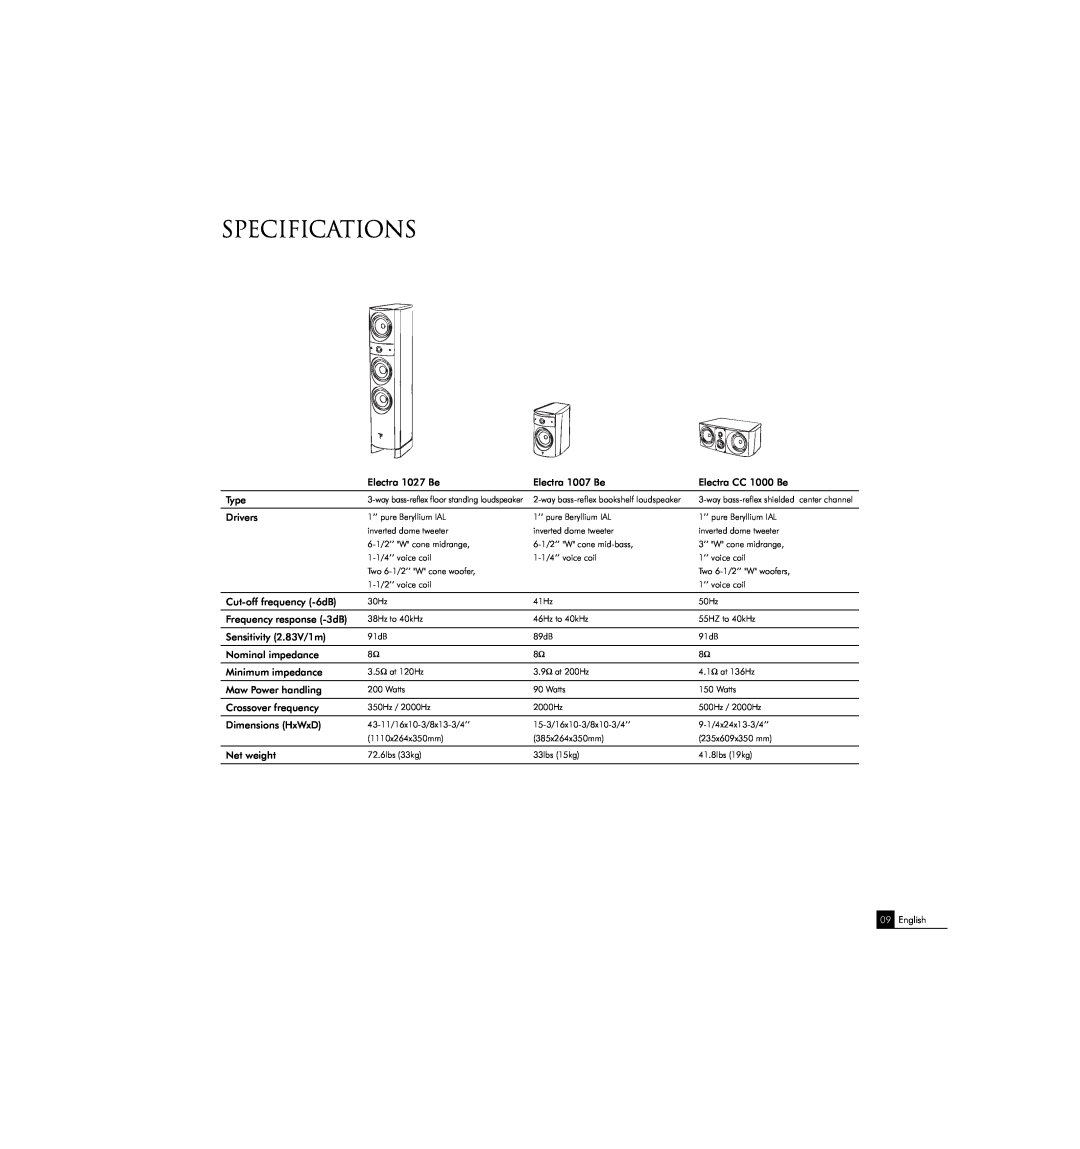 Focal 1000 Series user manual specifications 